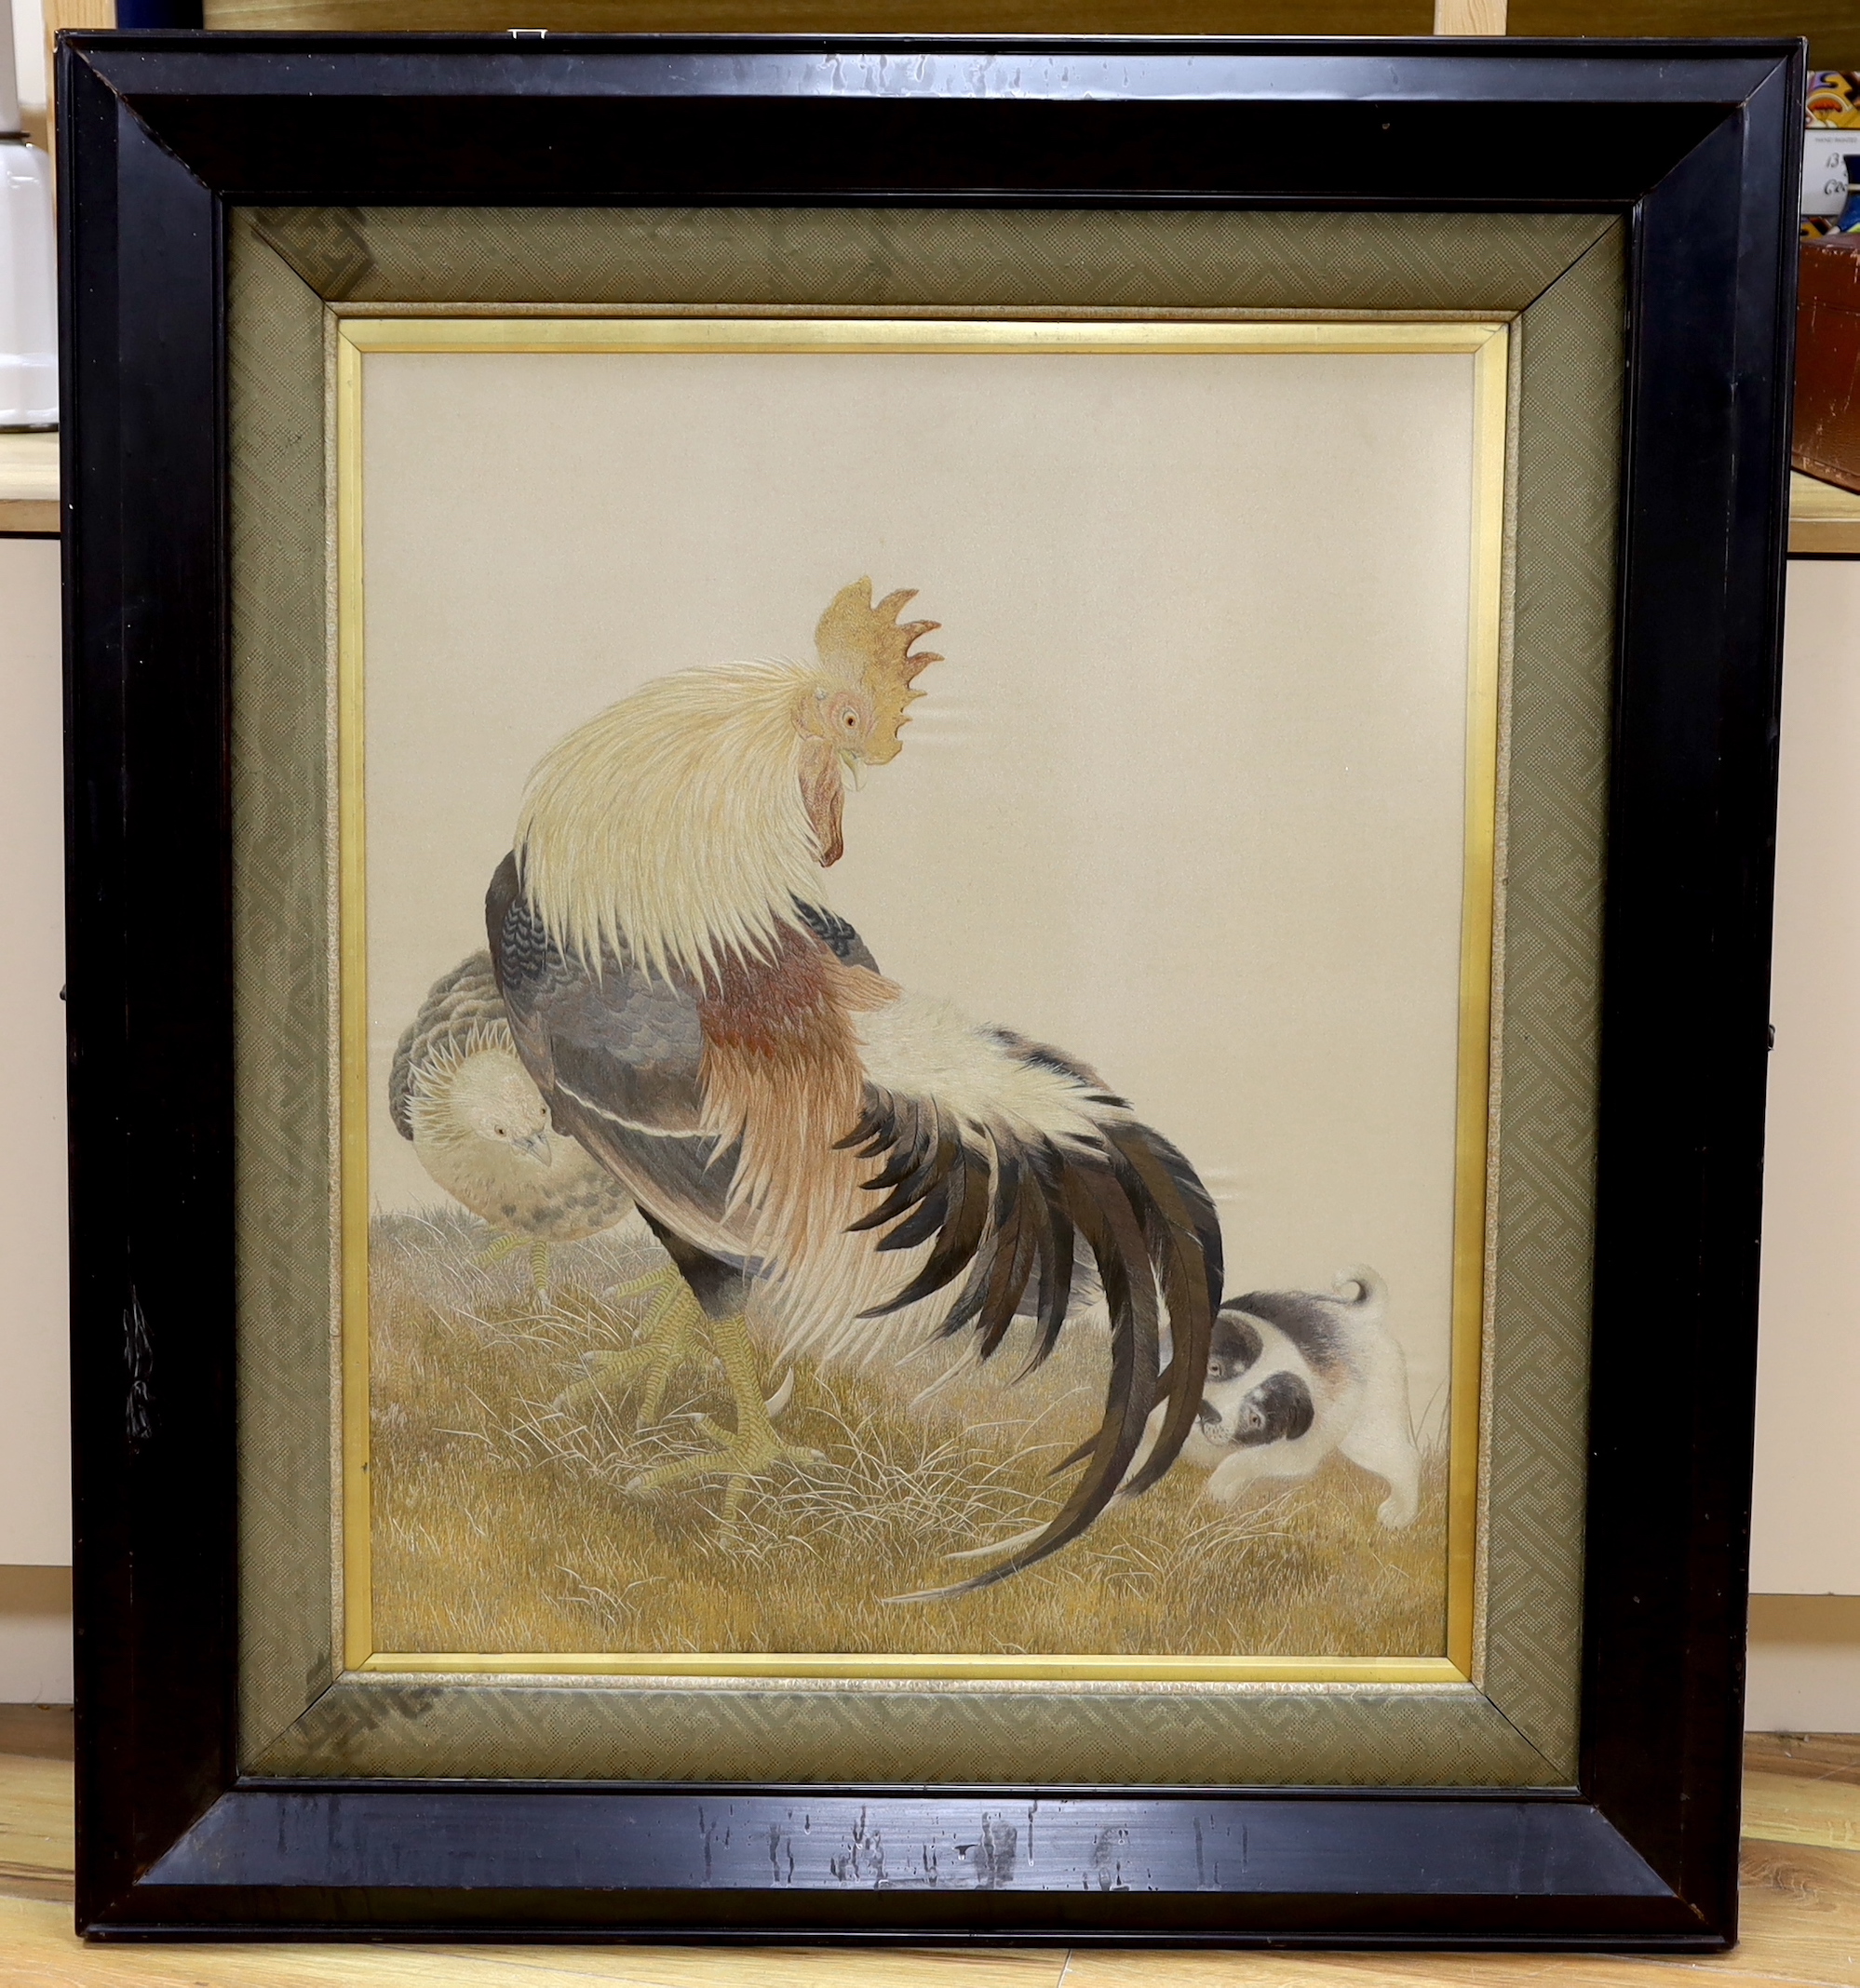 A large framed early 20th century Japanese silk polychrome embroidery of a cockerel, it’s chick and puppy by the chicken’s tail feathers, 63cm wide x 75cm high, not including mount or frame